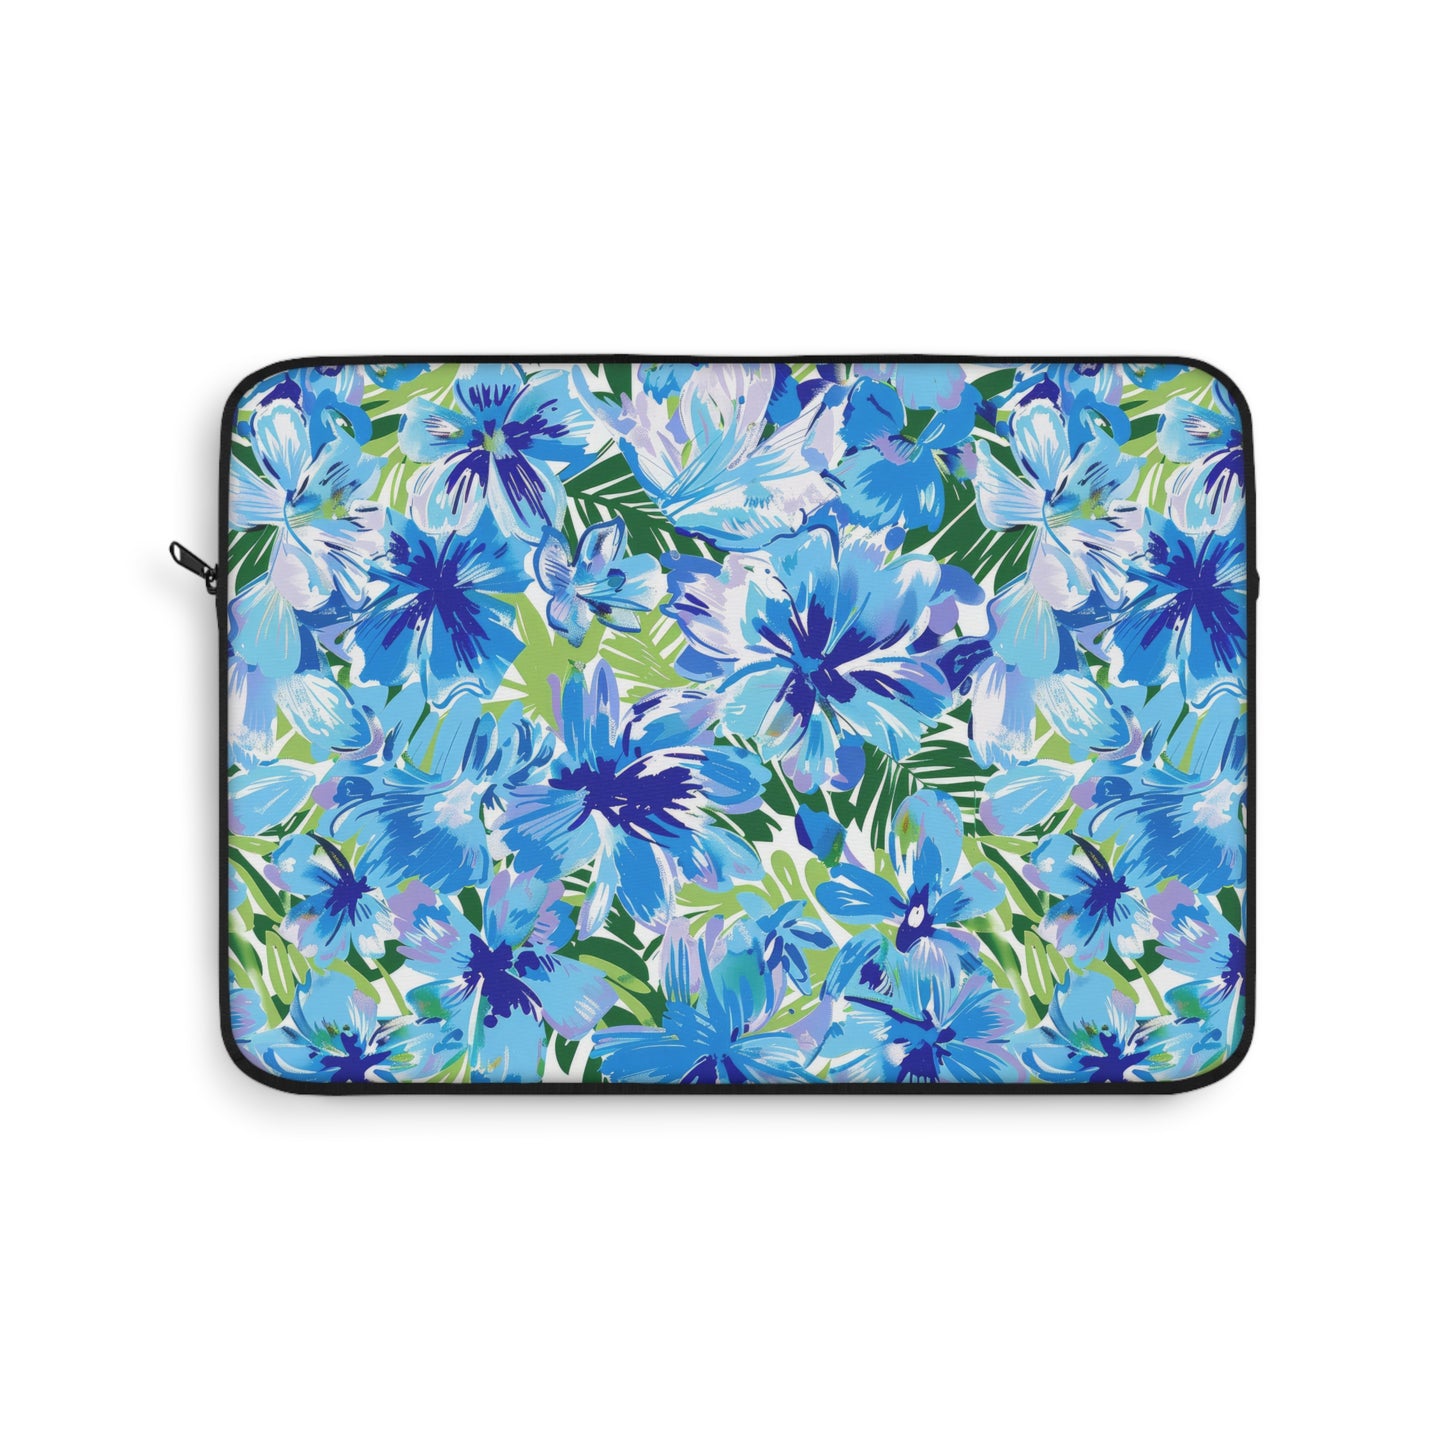 Azure Bloom Oasis: Bright Blue Large Flowers with Lush Green Palm Leaves Laptop or Ipad Protective Sleeve Three Sizes Available